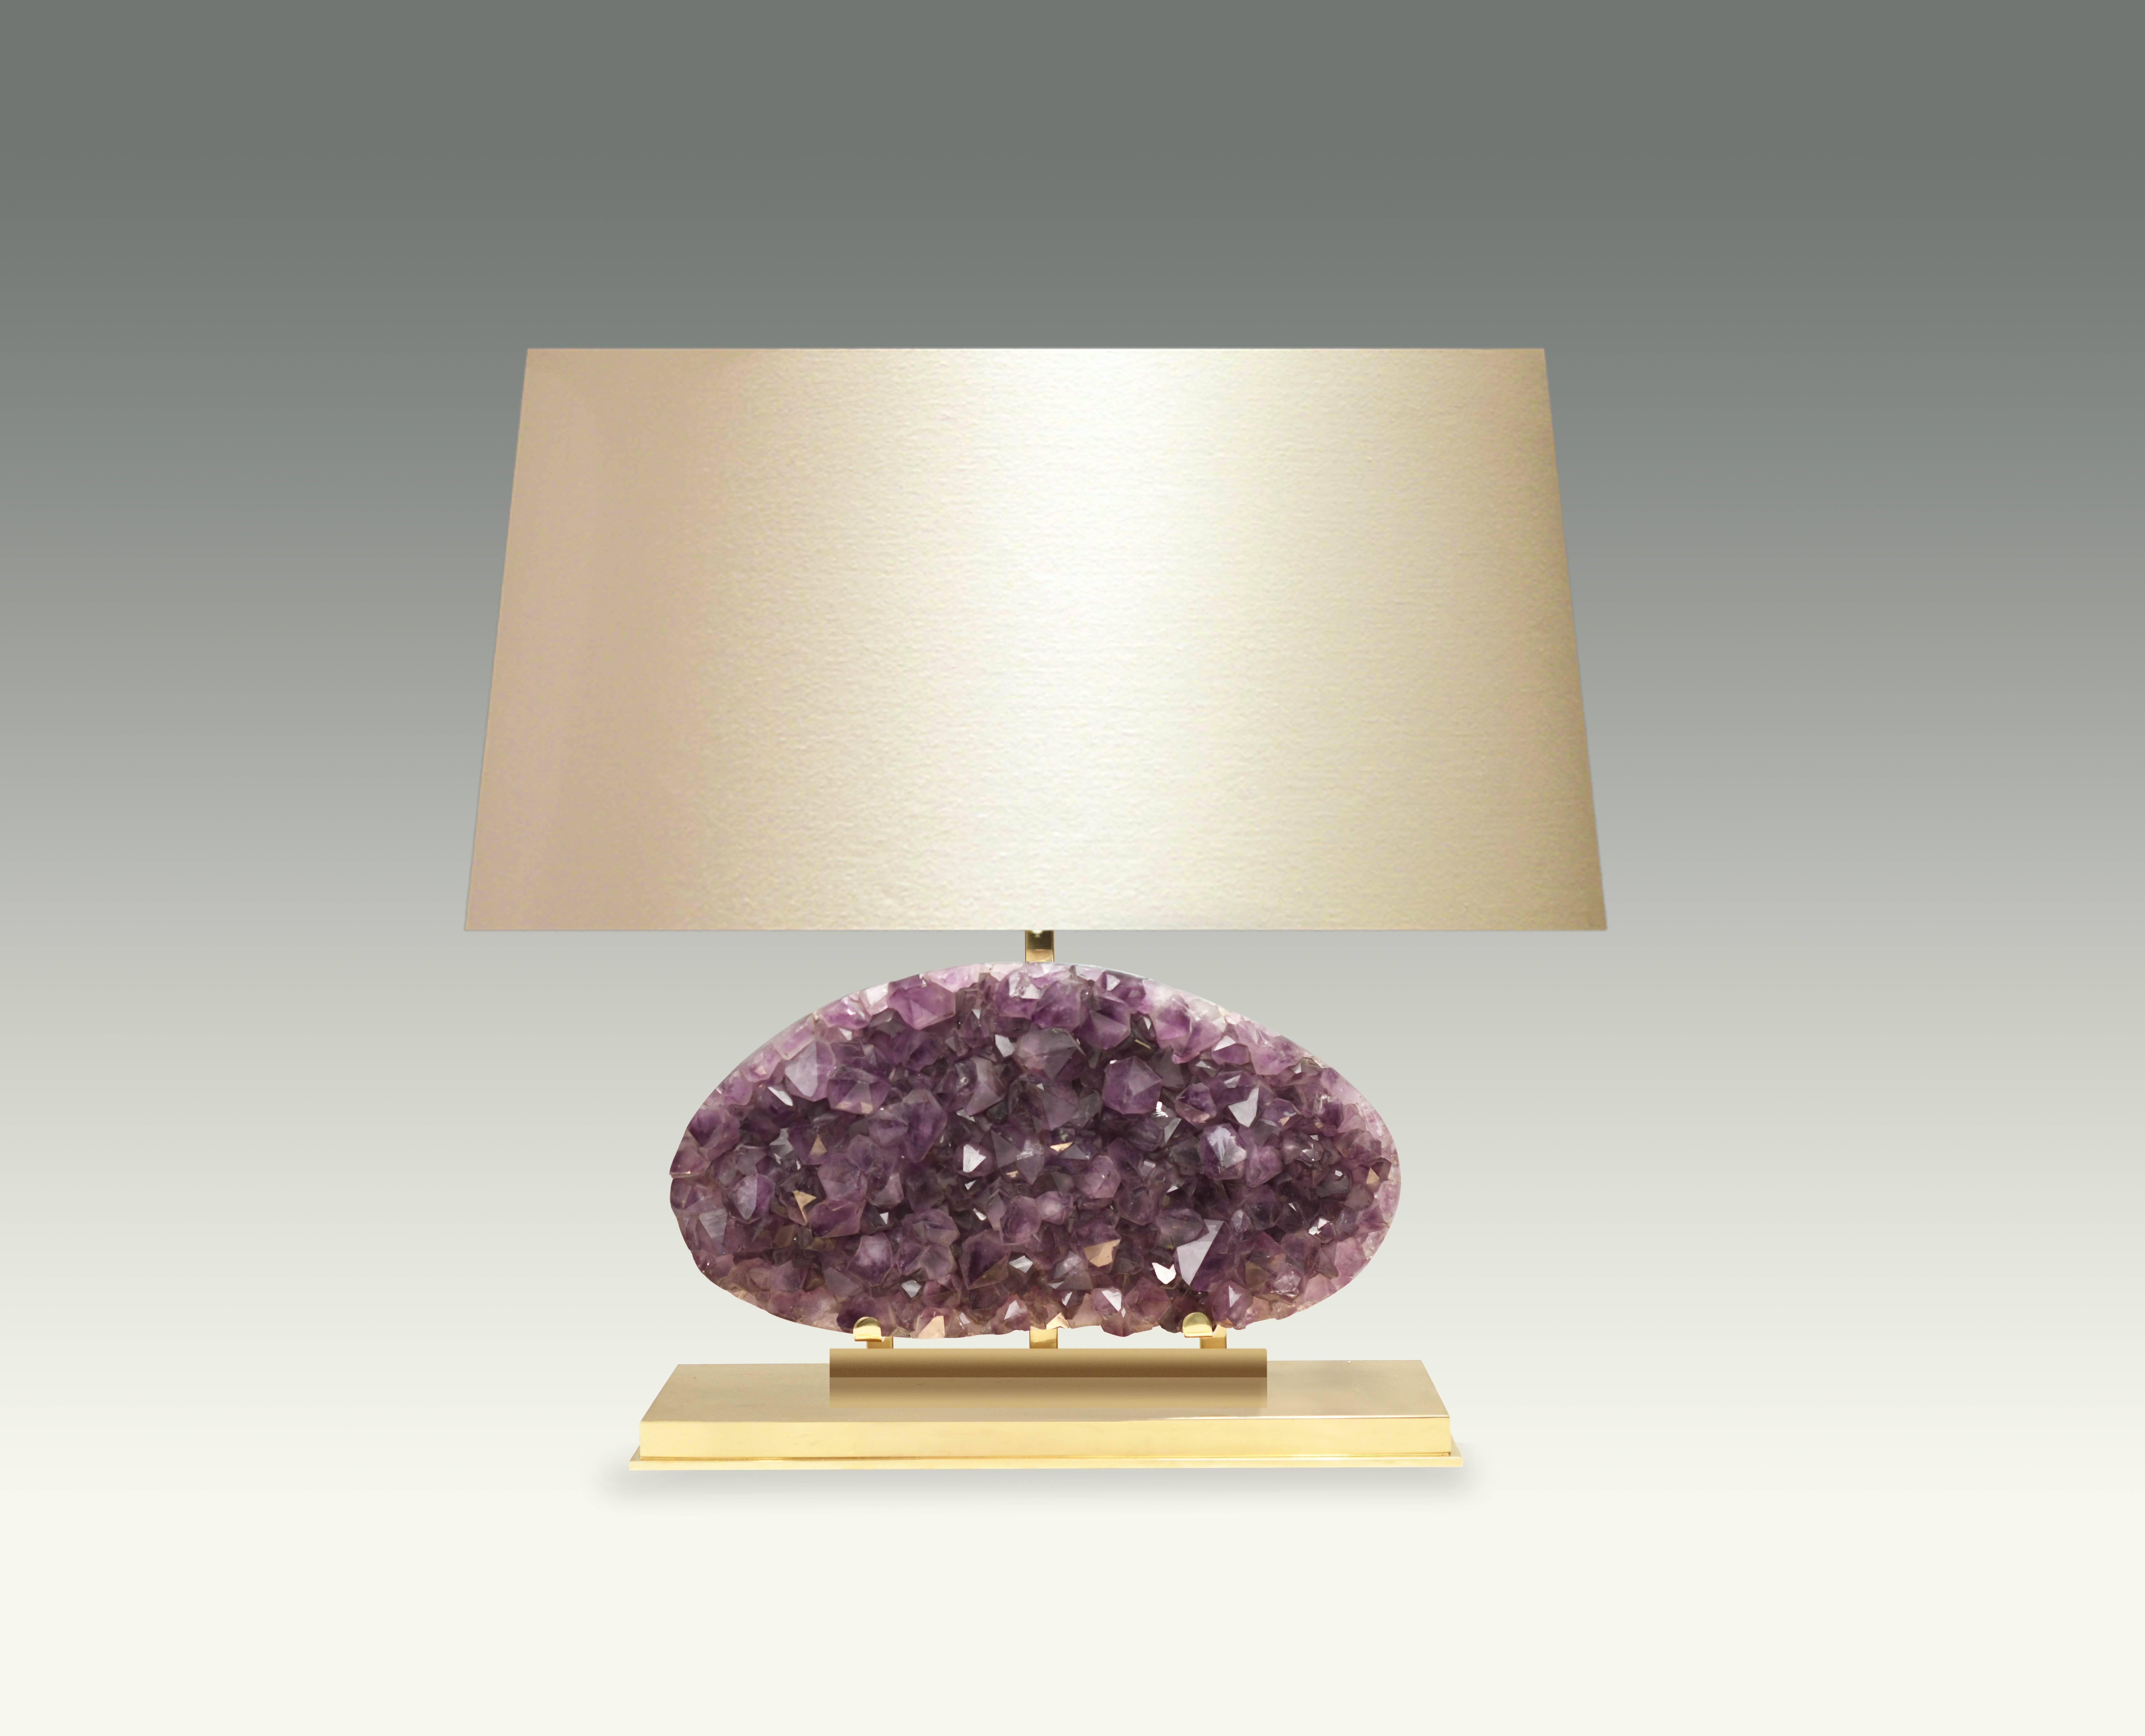 Amethyst geode cluster lamps. Mount is the lamp and the base is polished brass. Created by Phoenix Gallery NYC.

For more Rock Crystal lightings and accessories from Phoenix gallery, please search 